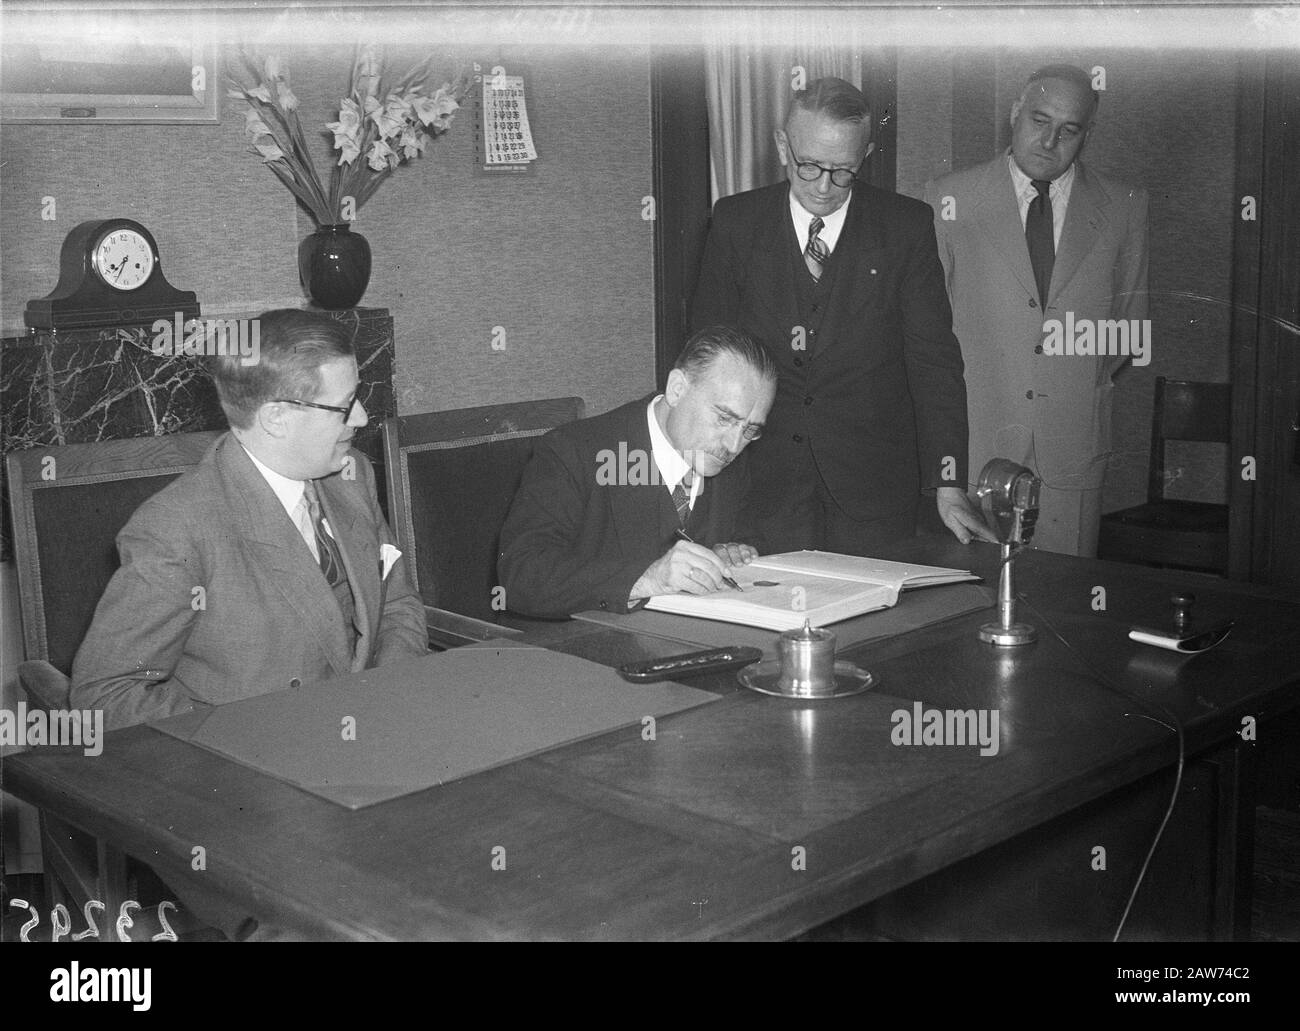 Social Affairs Minister Willem Drees signs Wederzijdigheid Social Insurance Treaty between Belgium and the Netherlands. Left the Belgian Minister of him L.E. Troclet Date: August 29, 1947 Keywords: international agreements, ministers Person Name: Drees, Willem (sr.), Troclet, L. E. Stock Photo